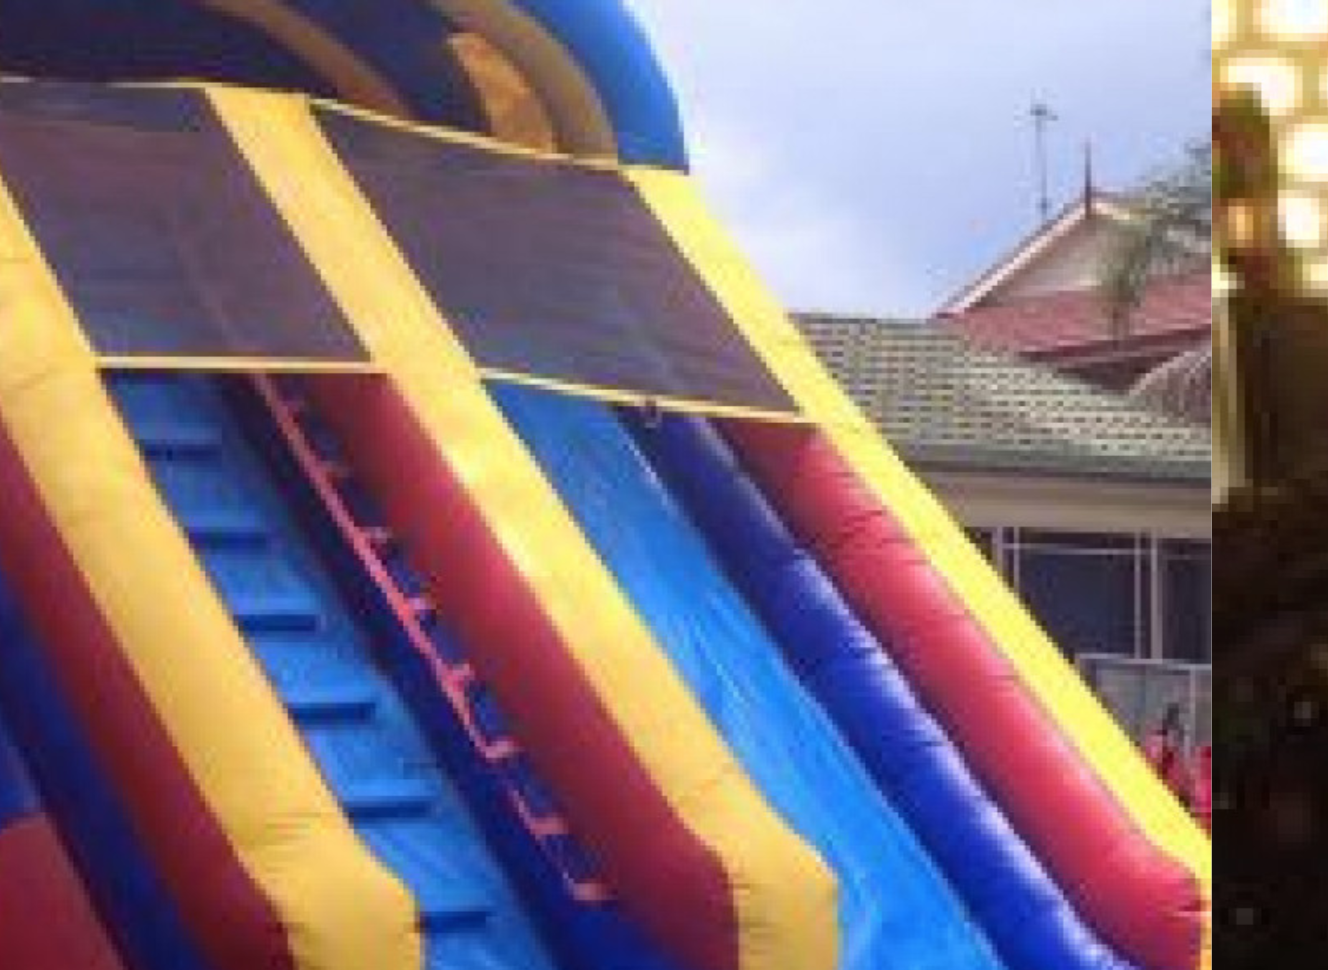 sydney jumping castle hire